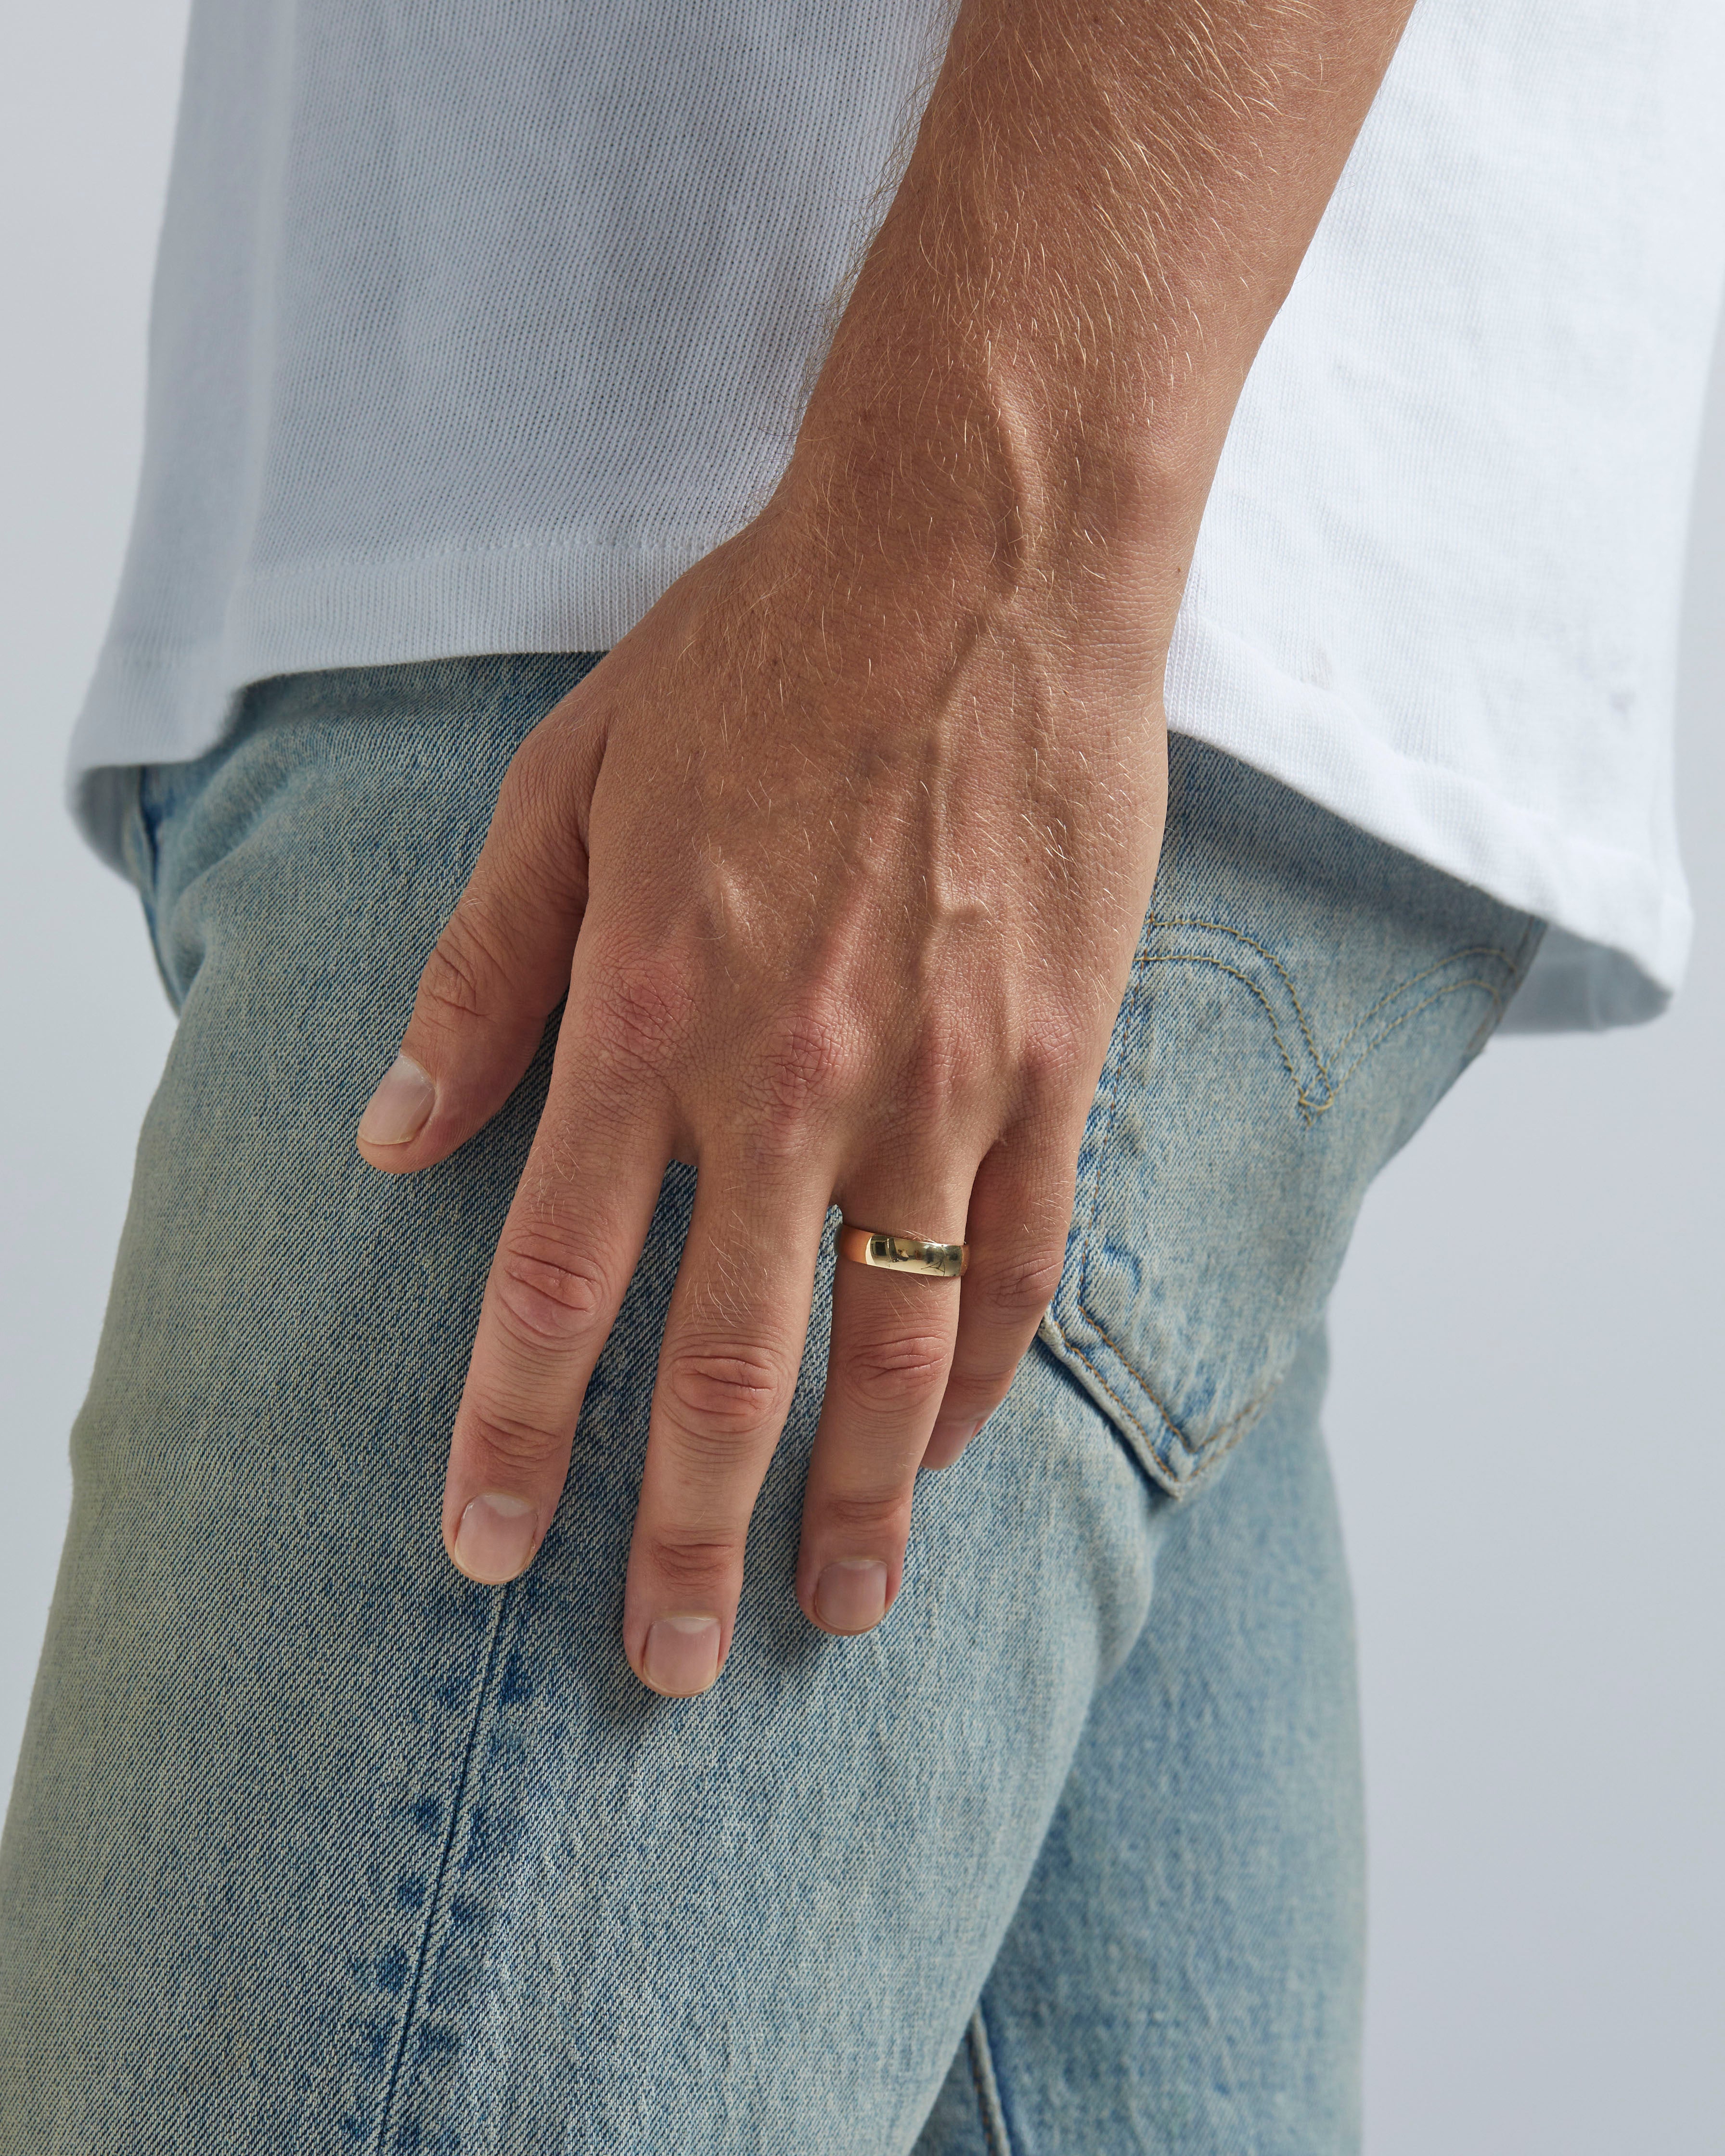 A model wears our 6mm classic wedding ring in yellow gold